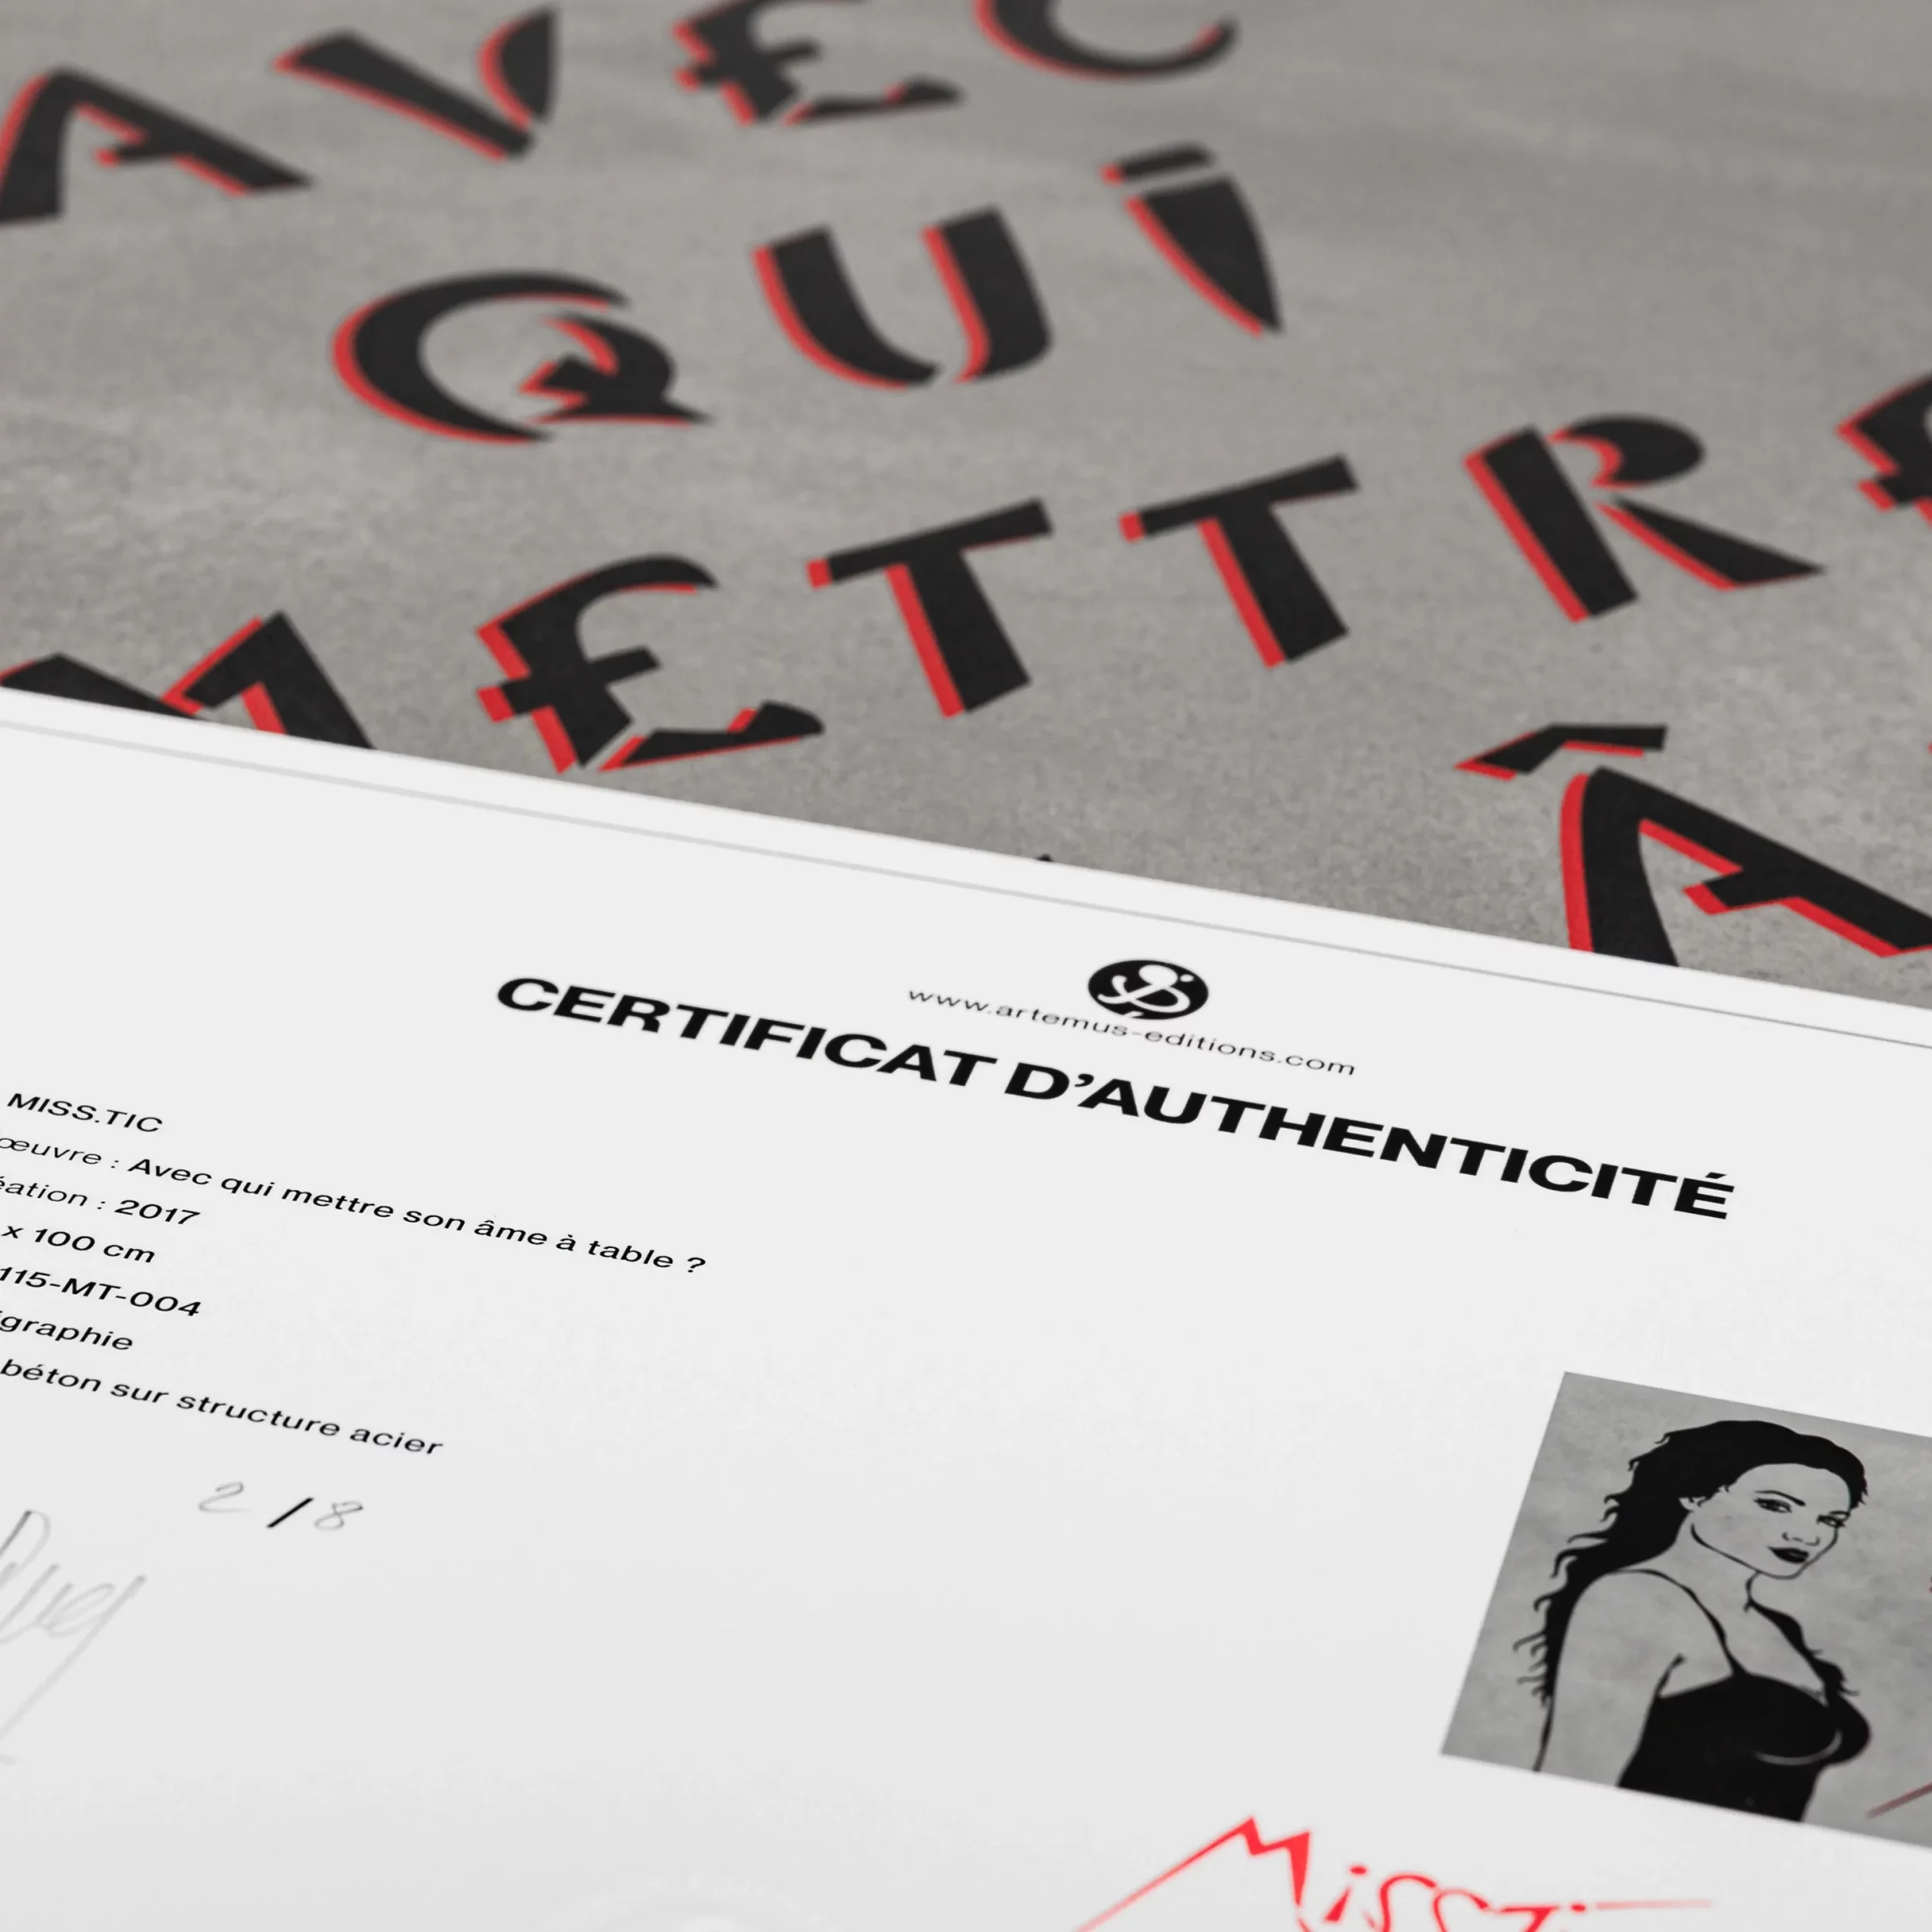 Close-up of the Miss.Tic limited edition concrete coffee table and certificate of authenticity